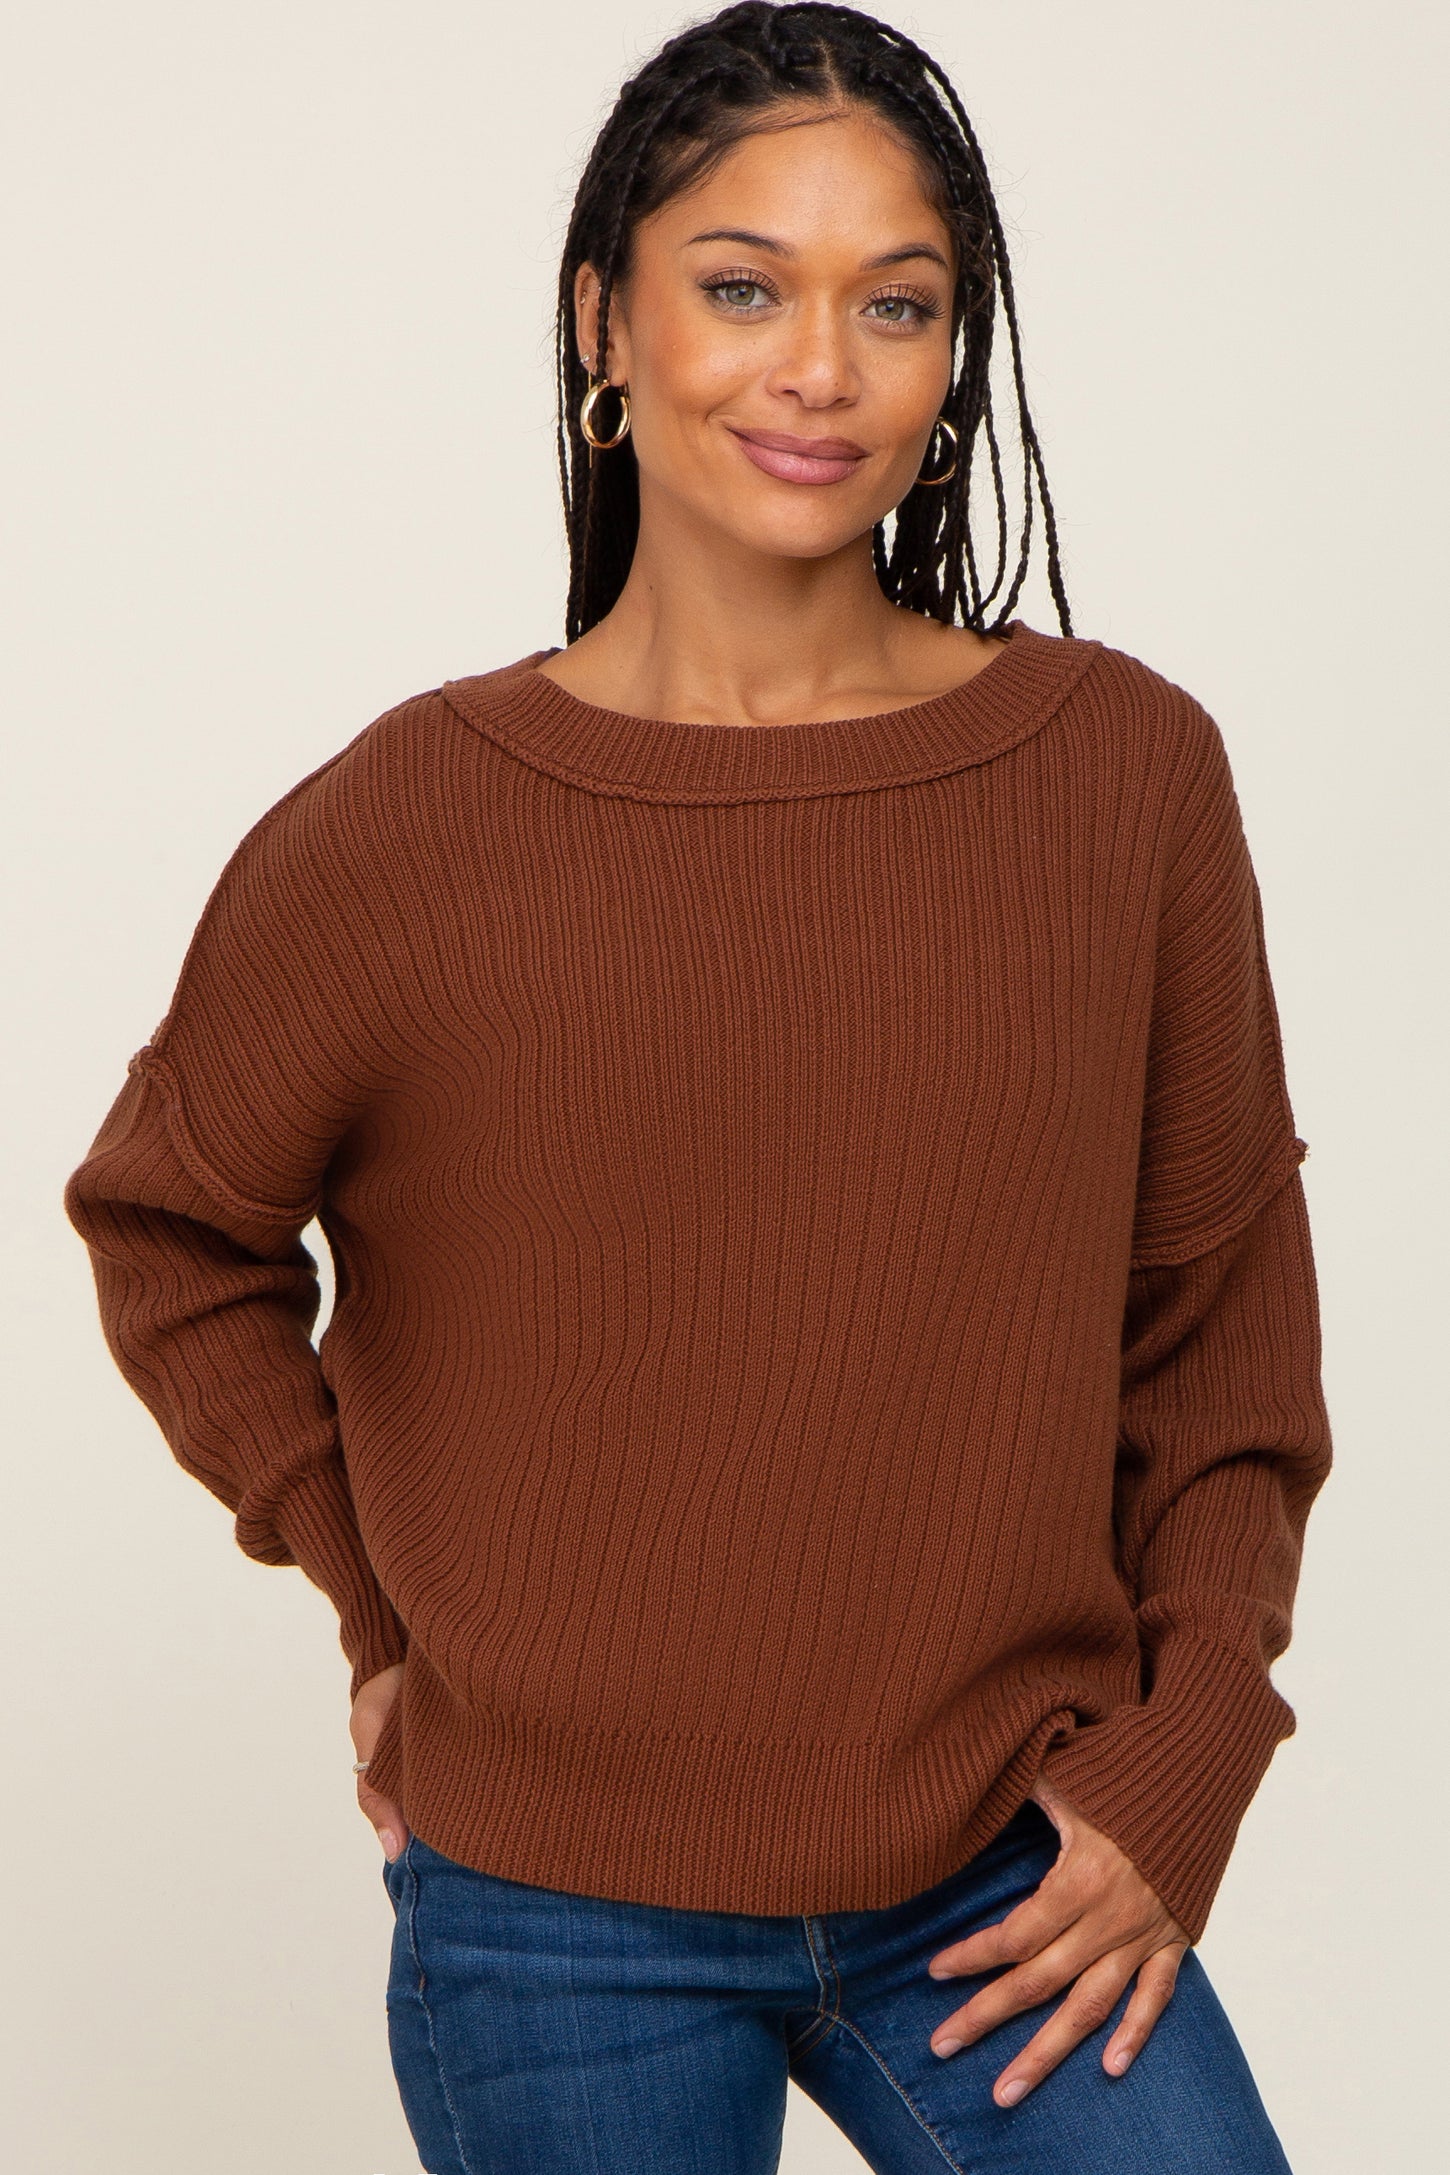 Brown Ribbed Maternity Sweater